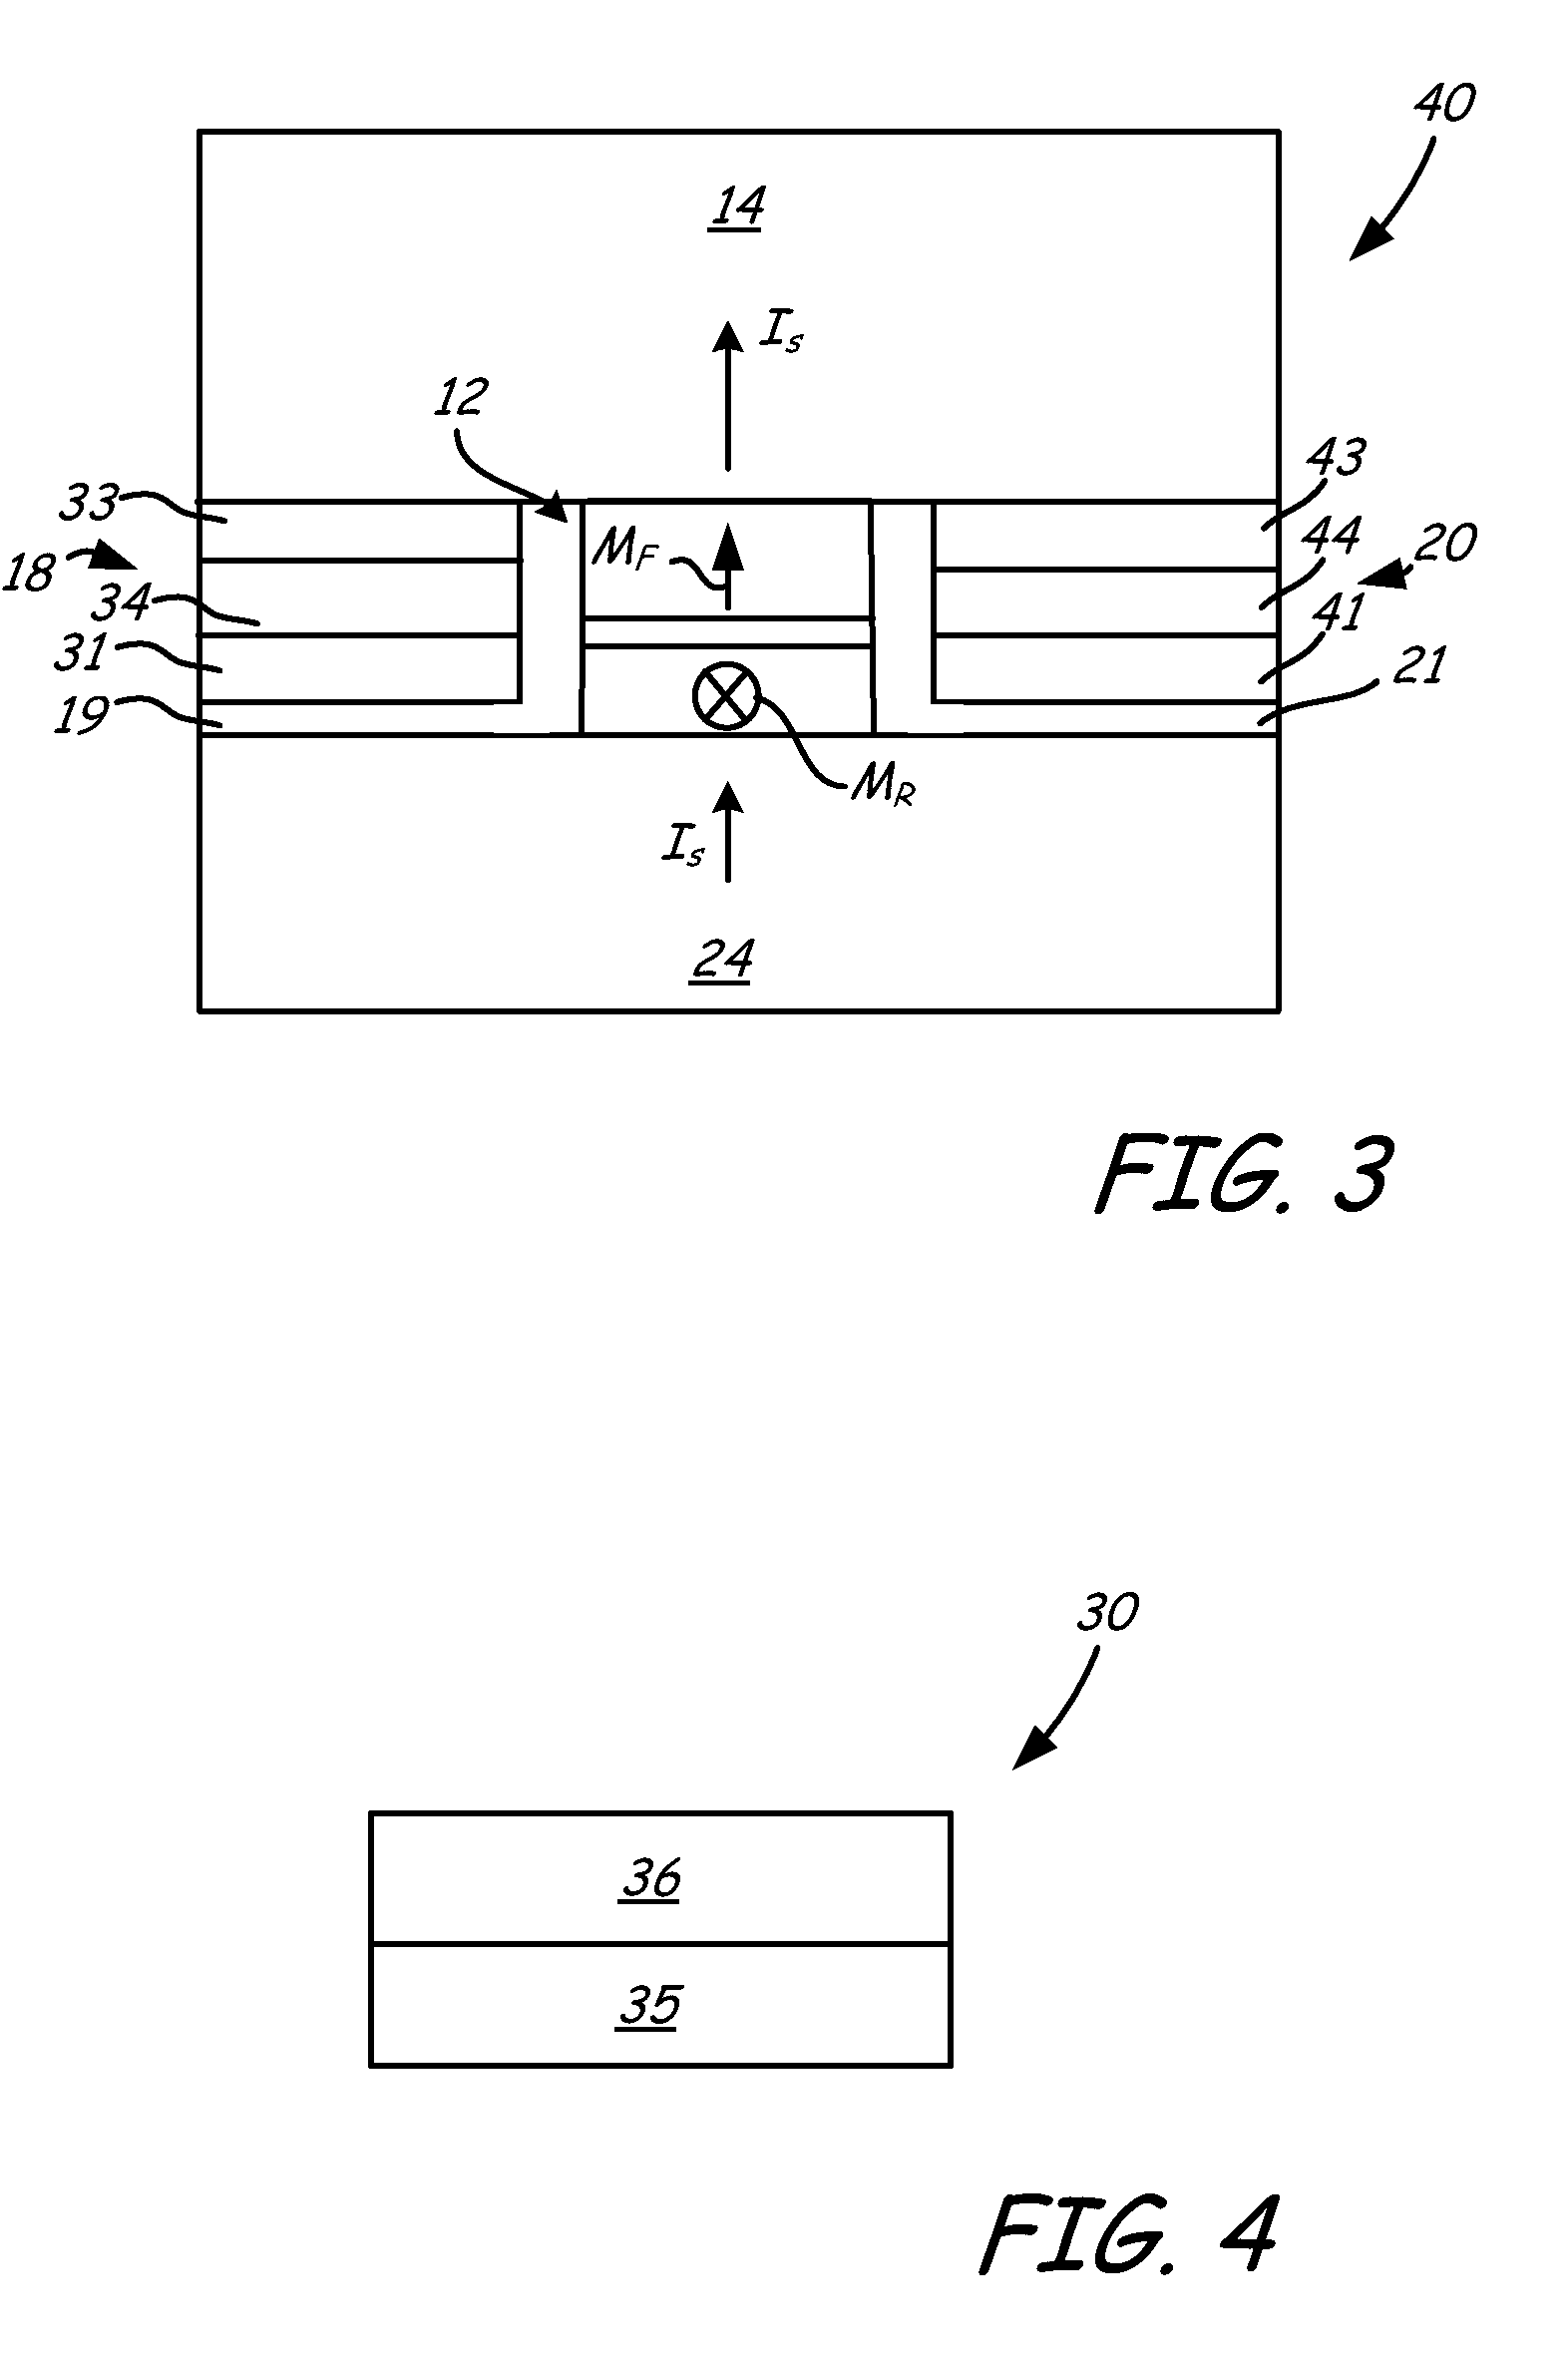 Magnetic sensor with perpendicular anisotrophy free layer and side shields